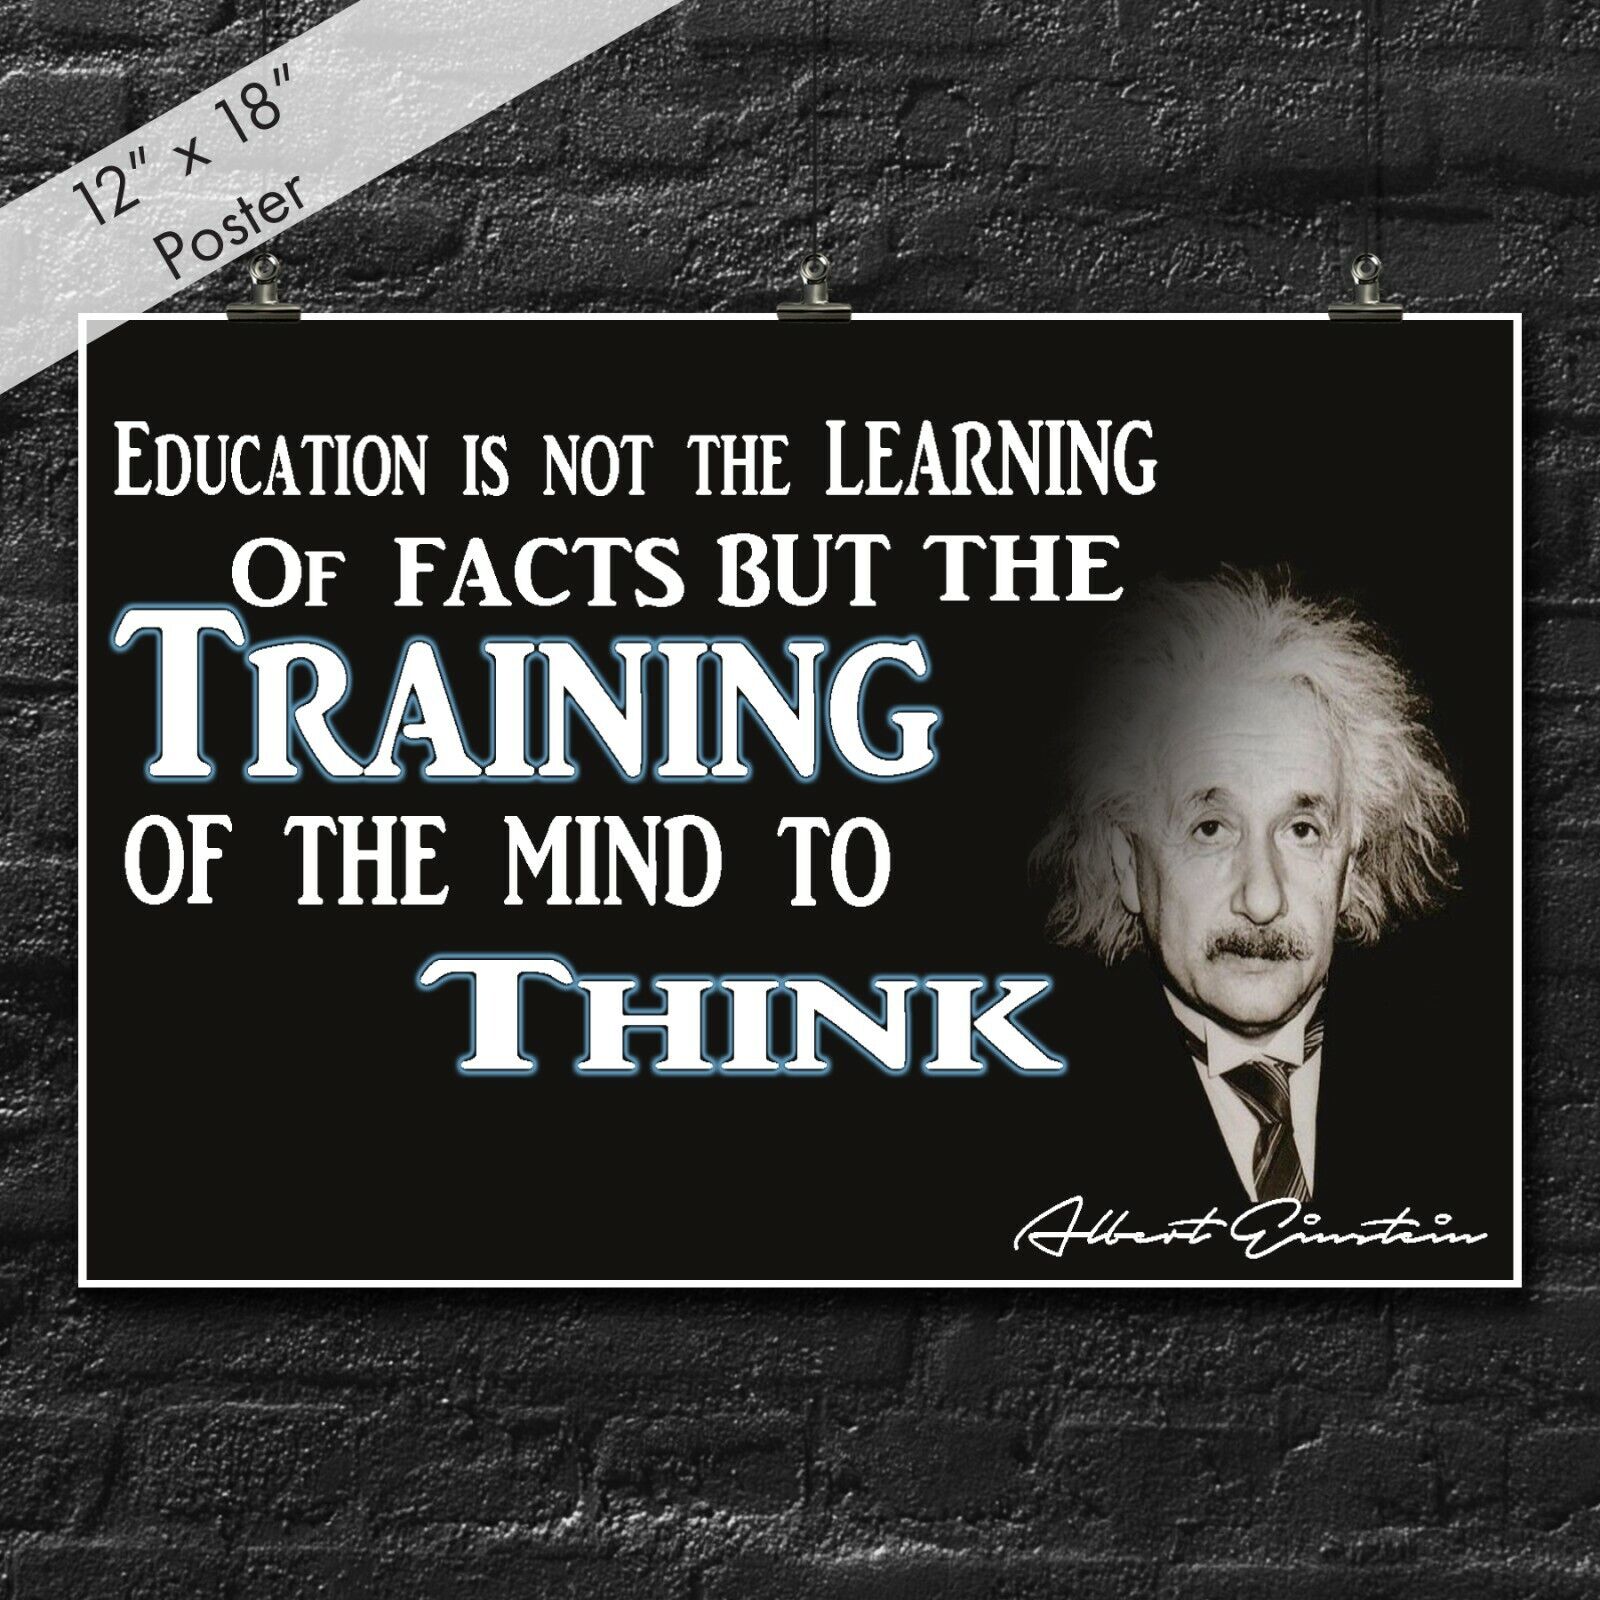 Albert Einstein Poster 12-inches By 18-inches Inspirational Motivational Prints